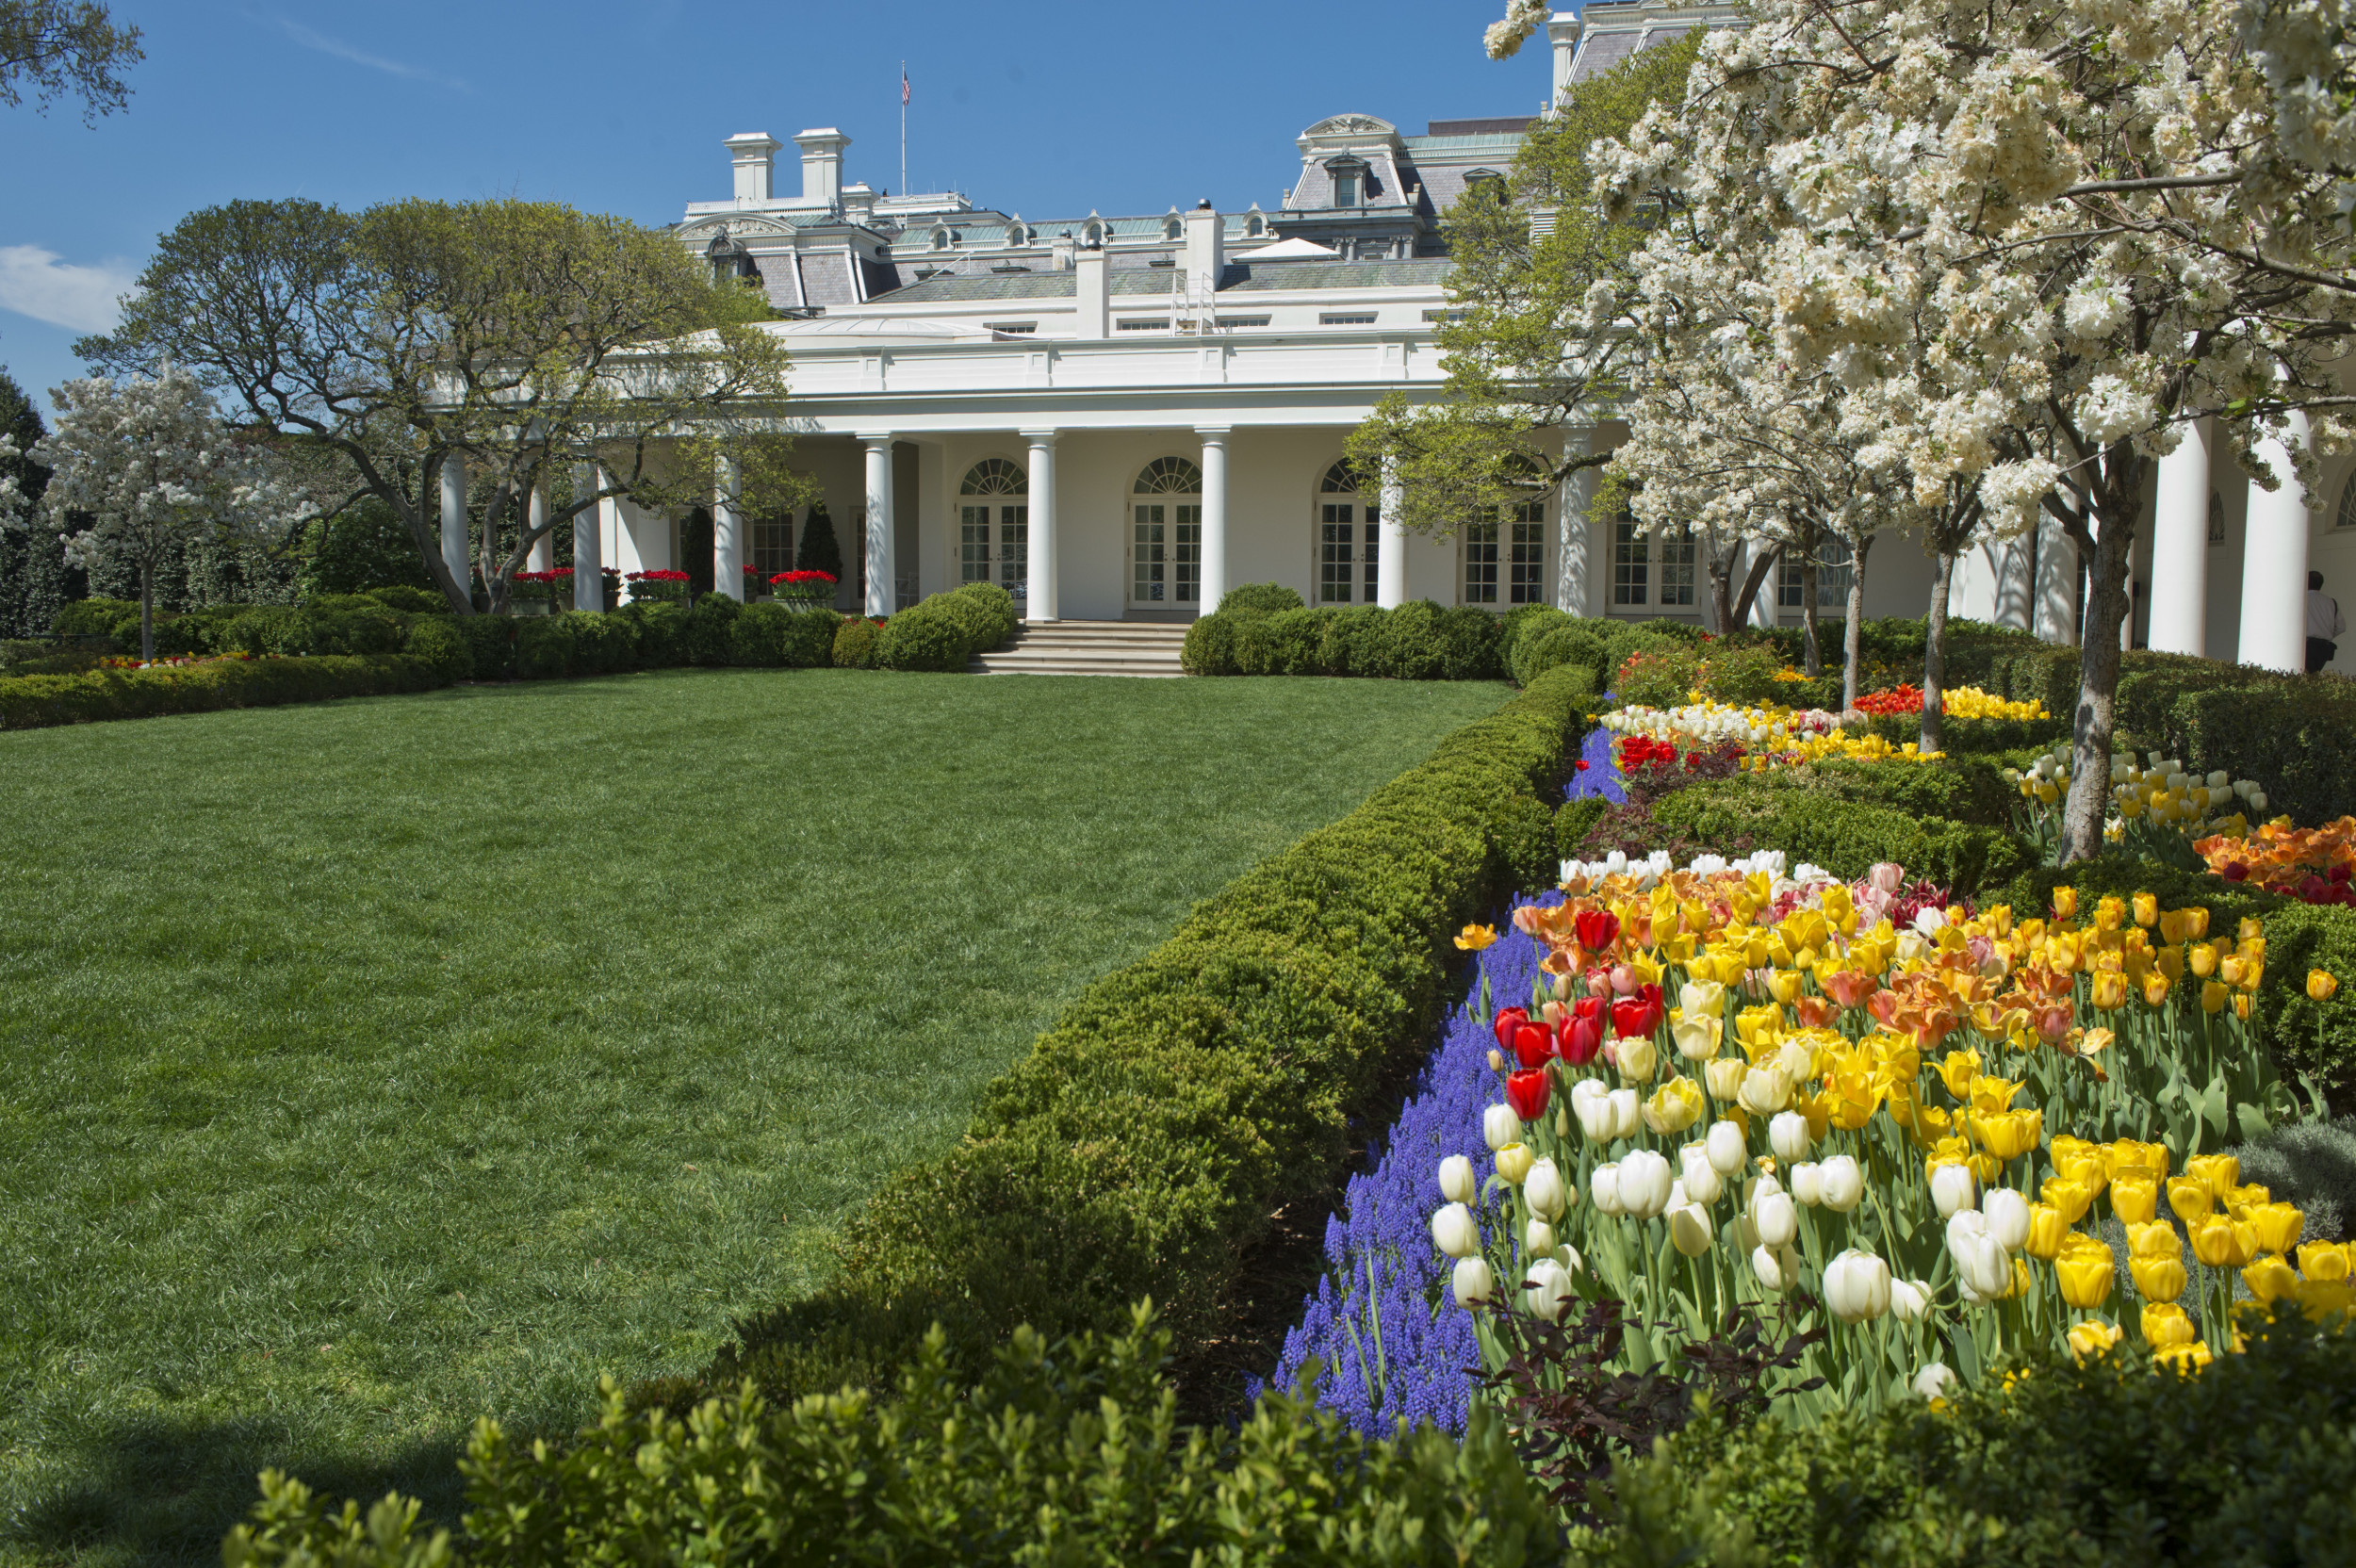 White House Rose Garden Over 60 Years—Pictures From 1961 to 2021